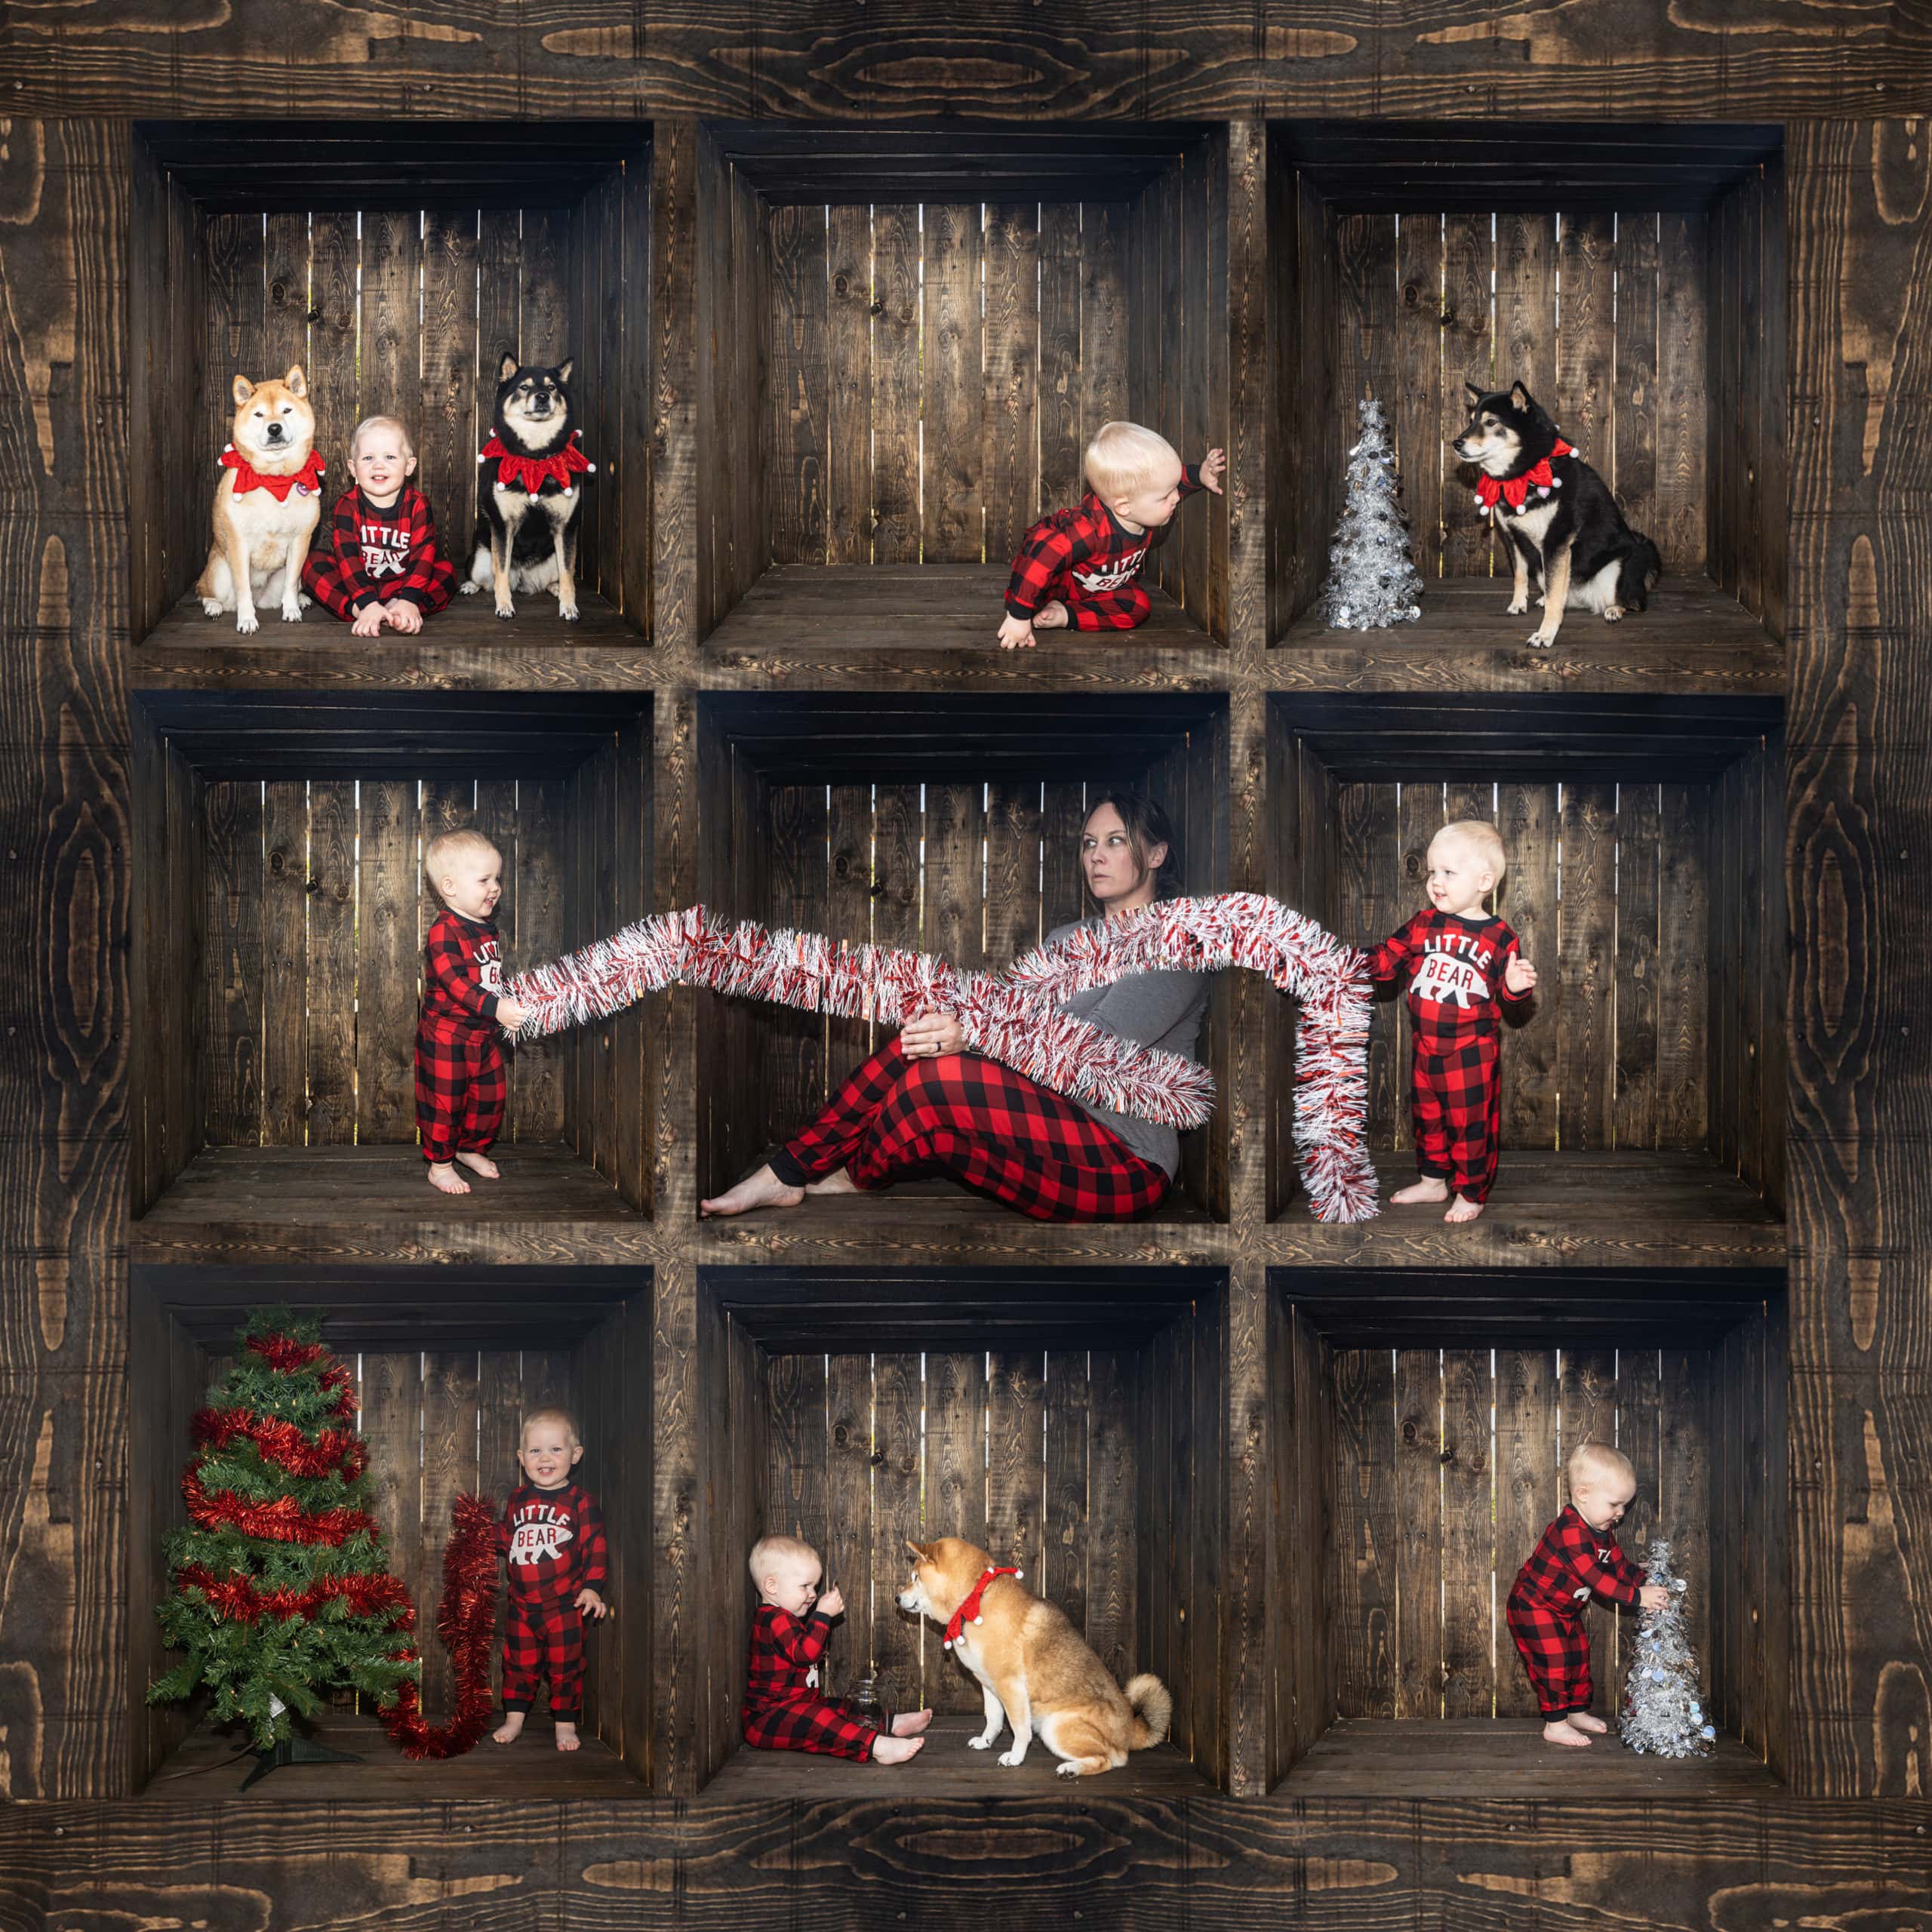 Composite image of nine different photos, each photo is the opening of the same wooden box with different subjects inside each. The subjects are a small child, an adult woman, and two dogs, the nine photos are arranged in a three by three gird giving the illusion of a series of squares stacked together. The subjects are all in a holiday Christmas theme